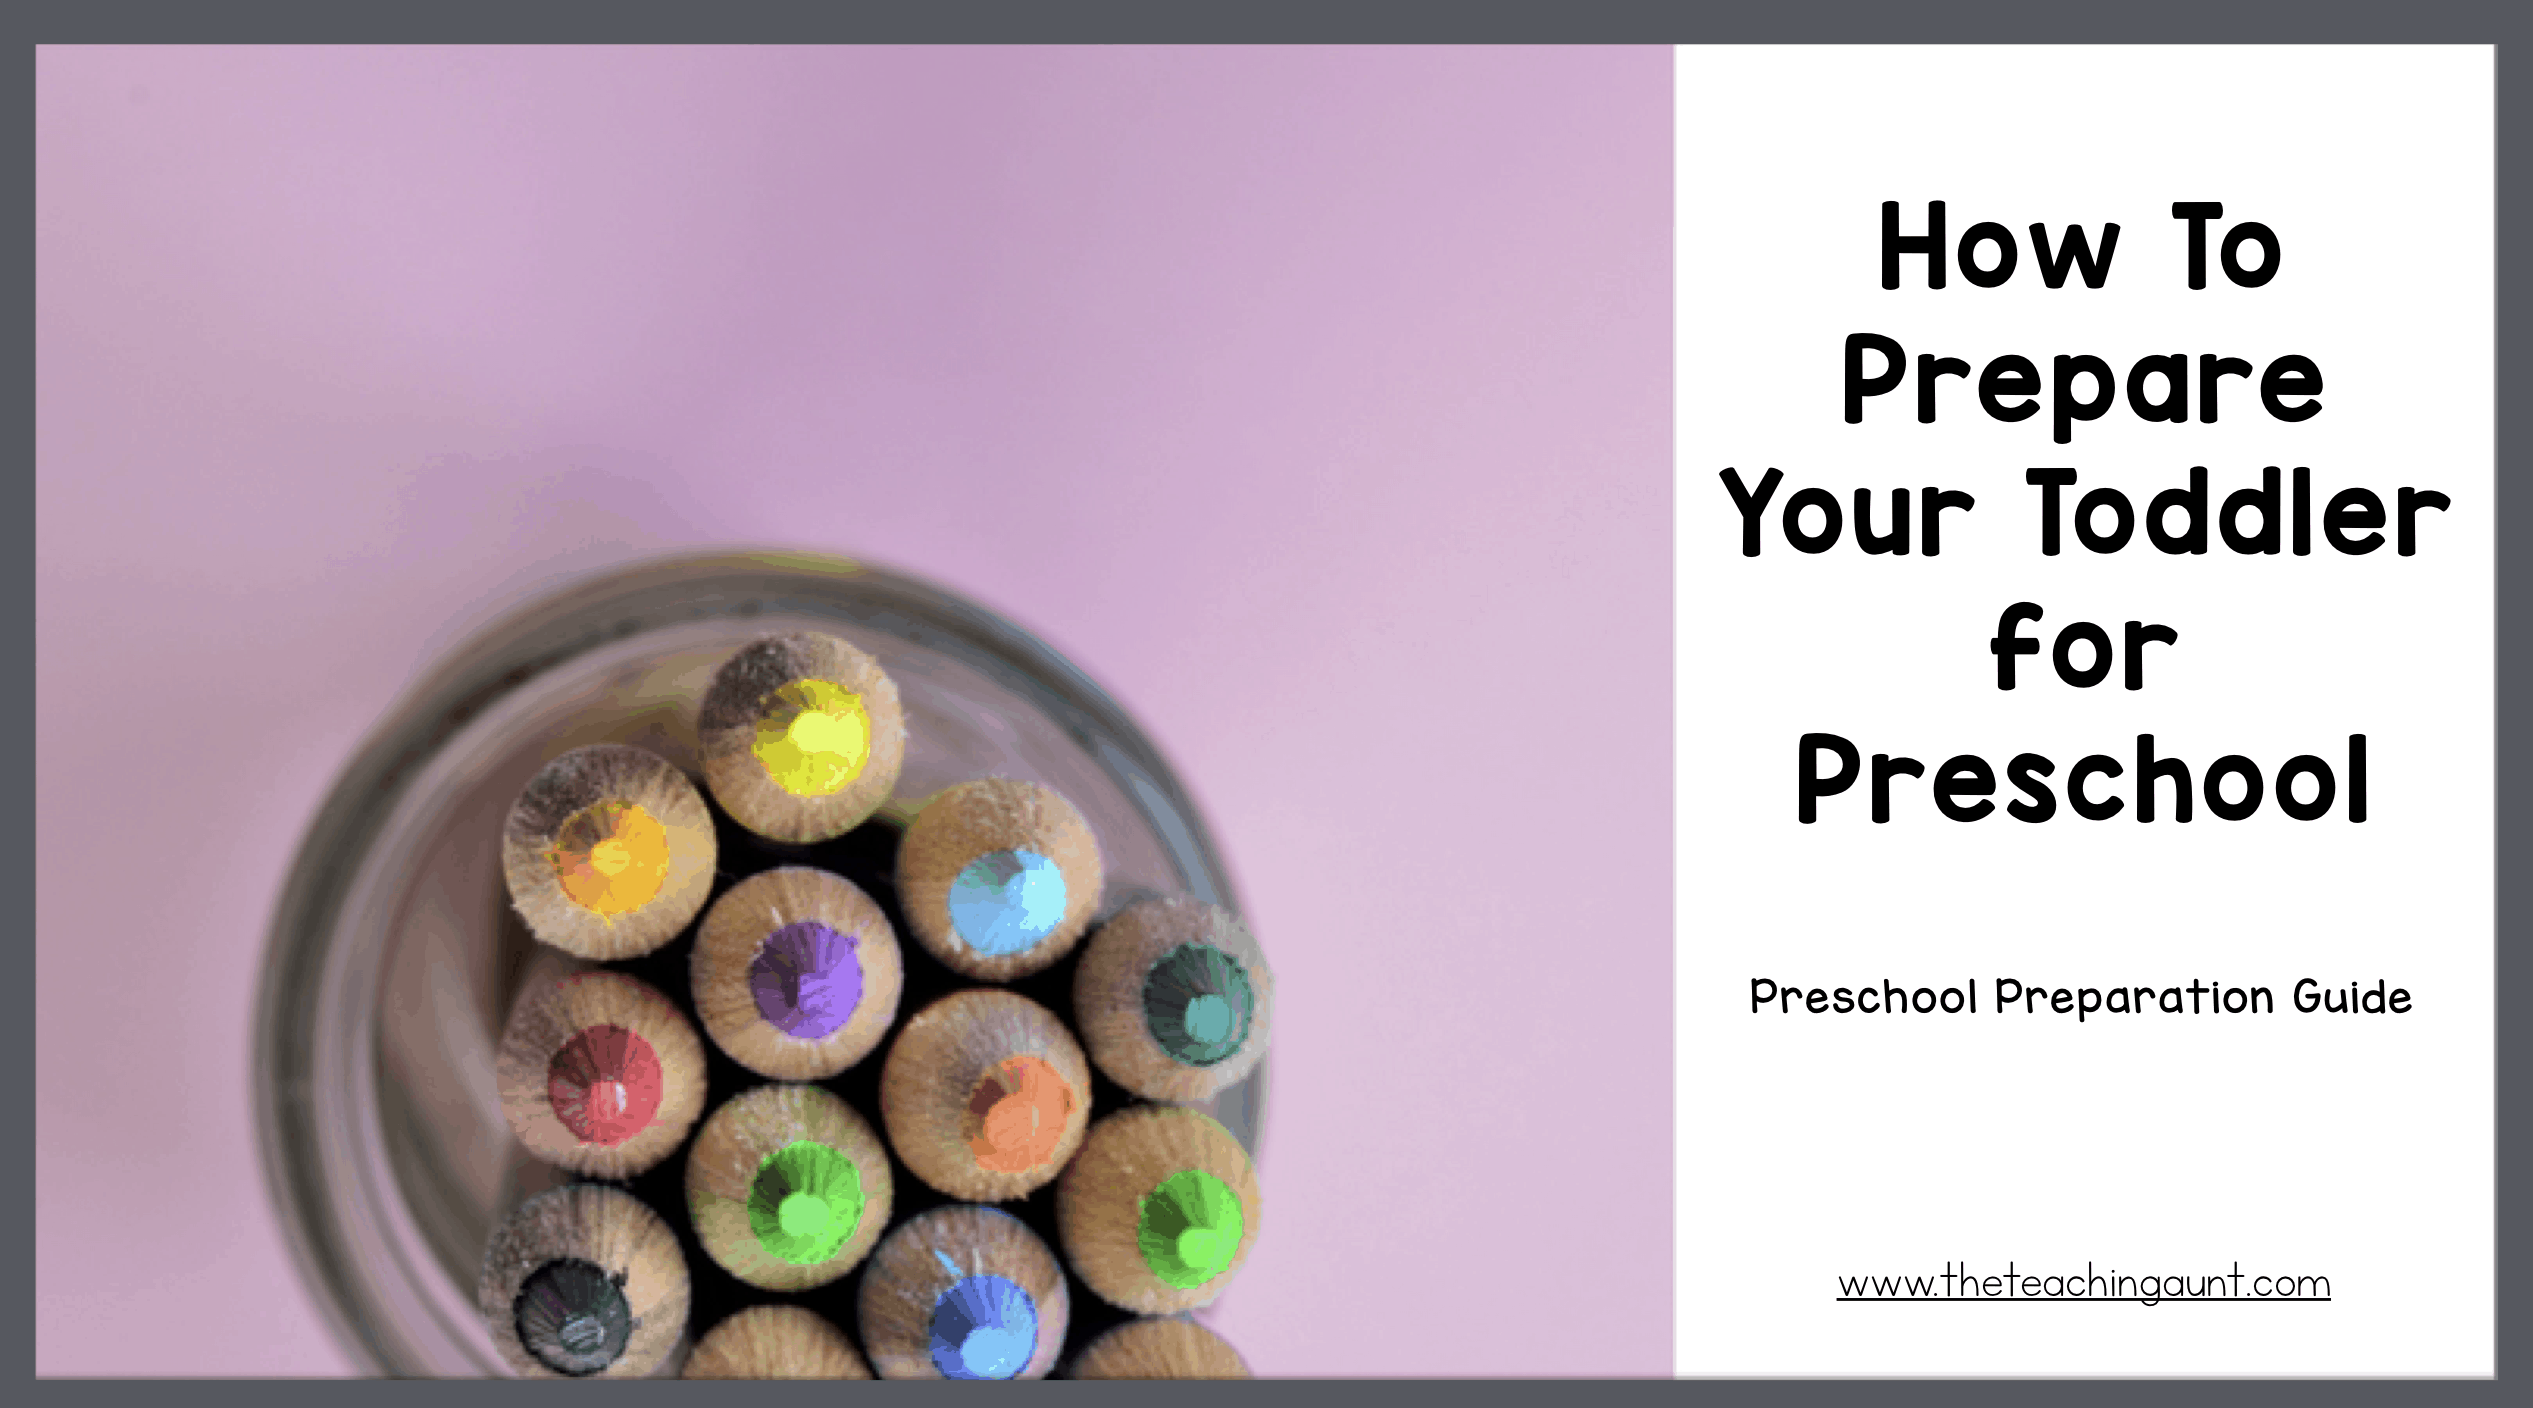 Preschool Readiness Guide for Parents: How To Get Your Toddler Ready For Preschool